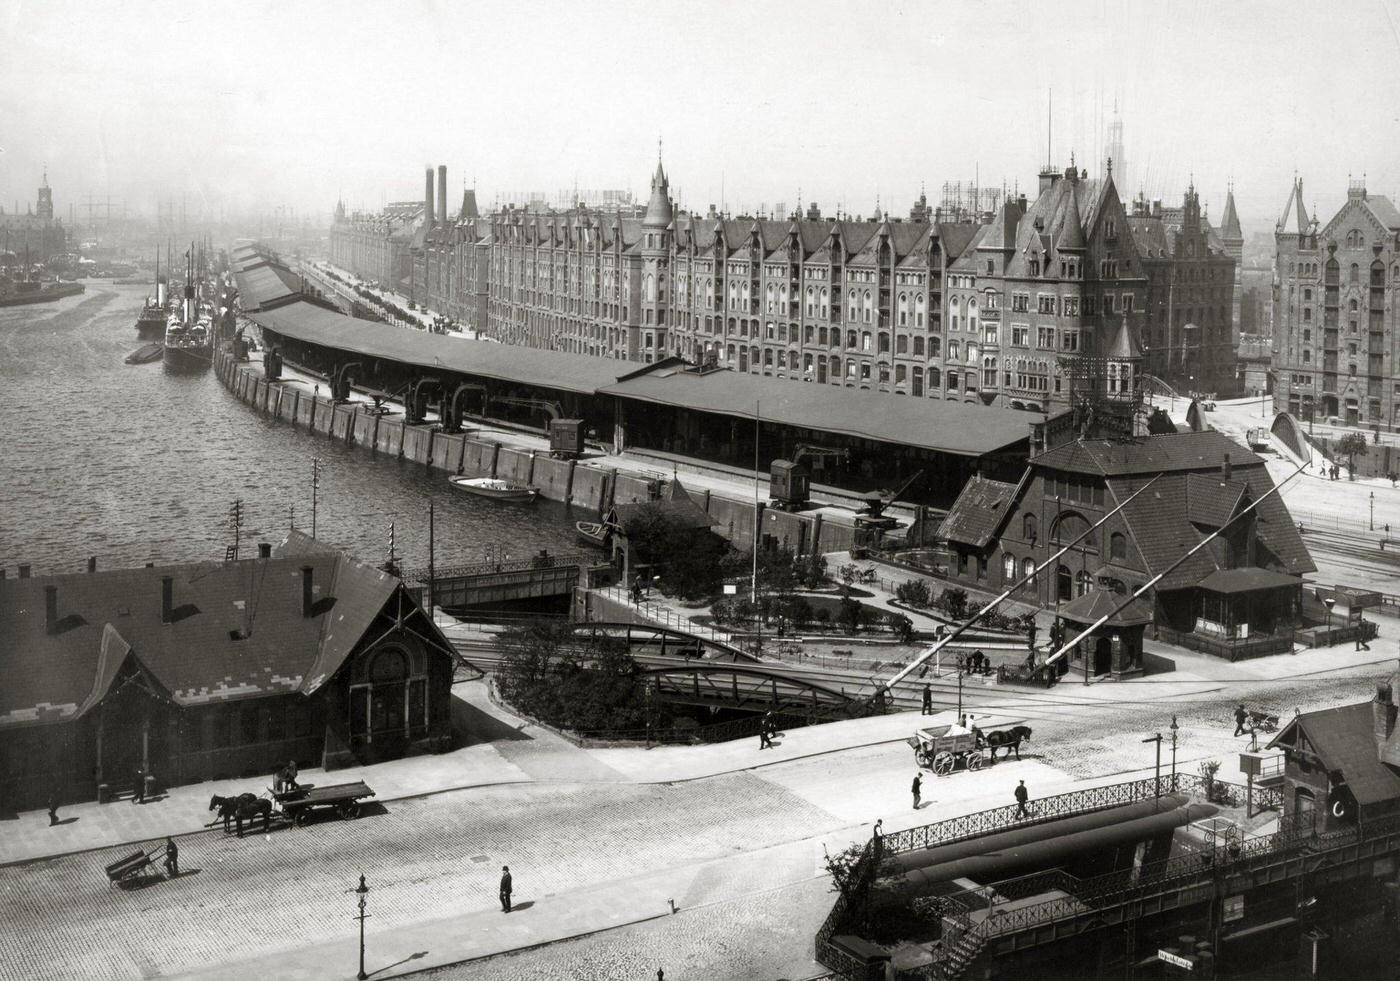 A view of the Free Harbour in Hamburg, Germany showing the Sandtor Quay, 1910